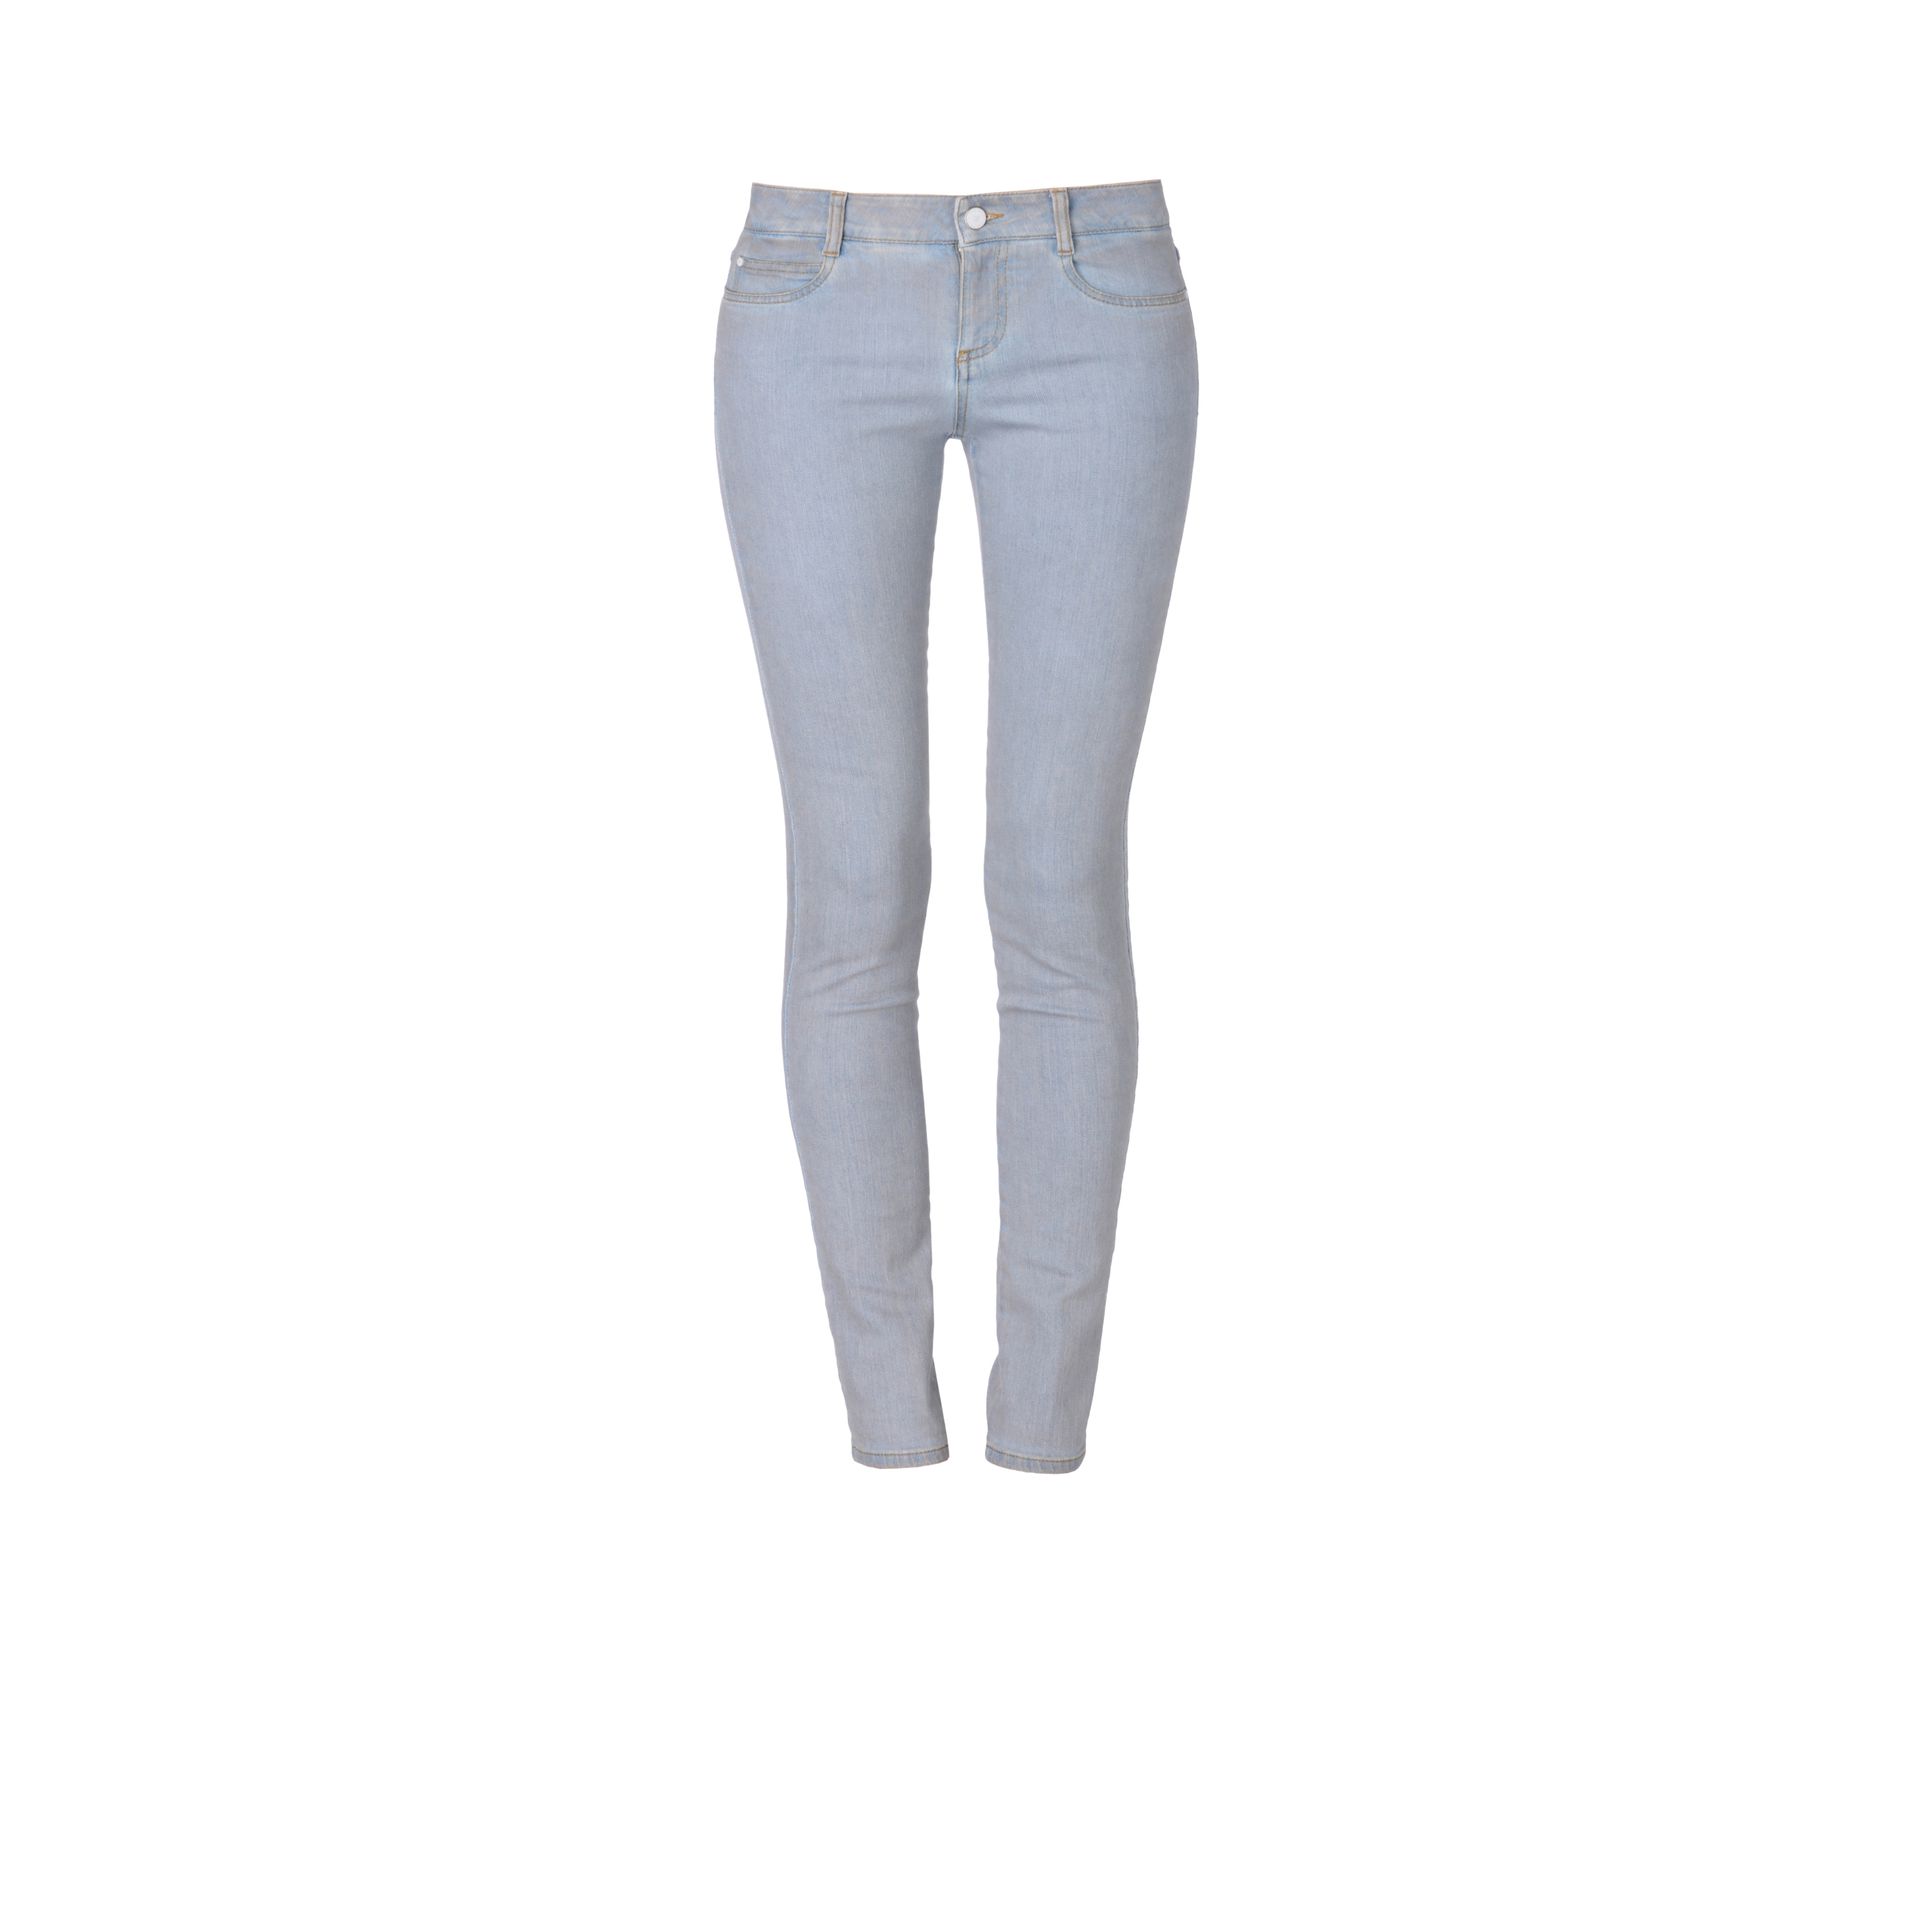 Stella McCartney - Lina Jeans - Shop at the official Online Store